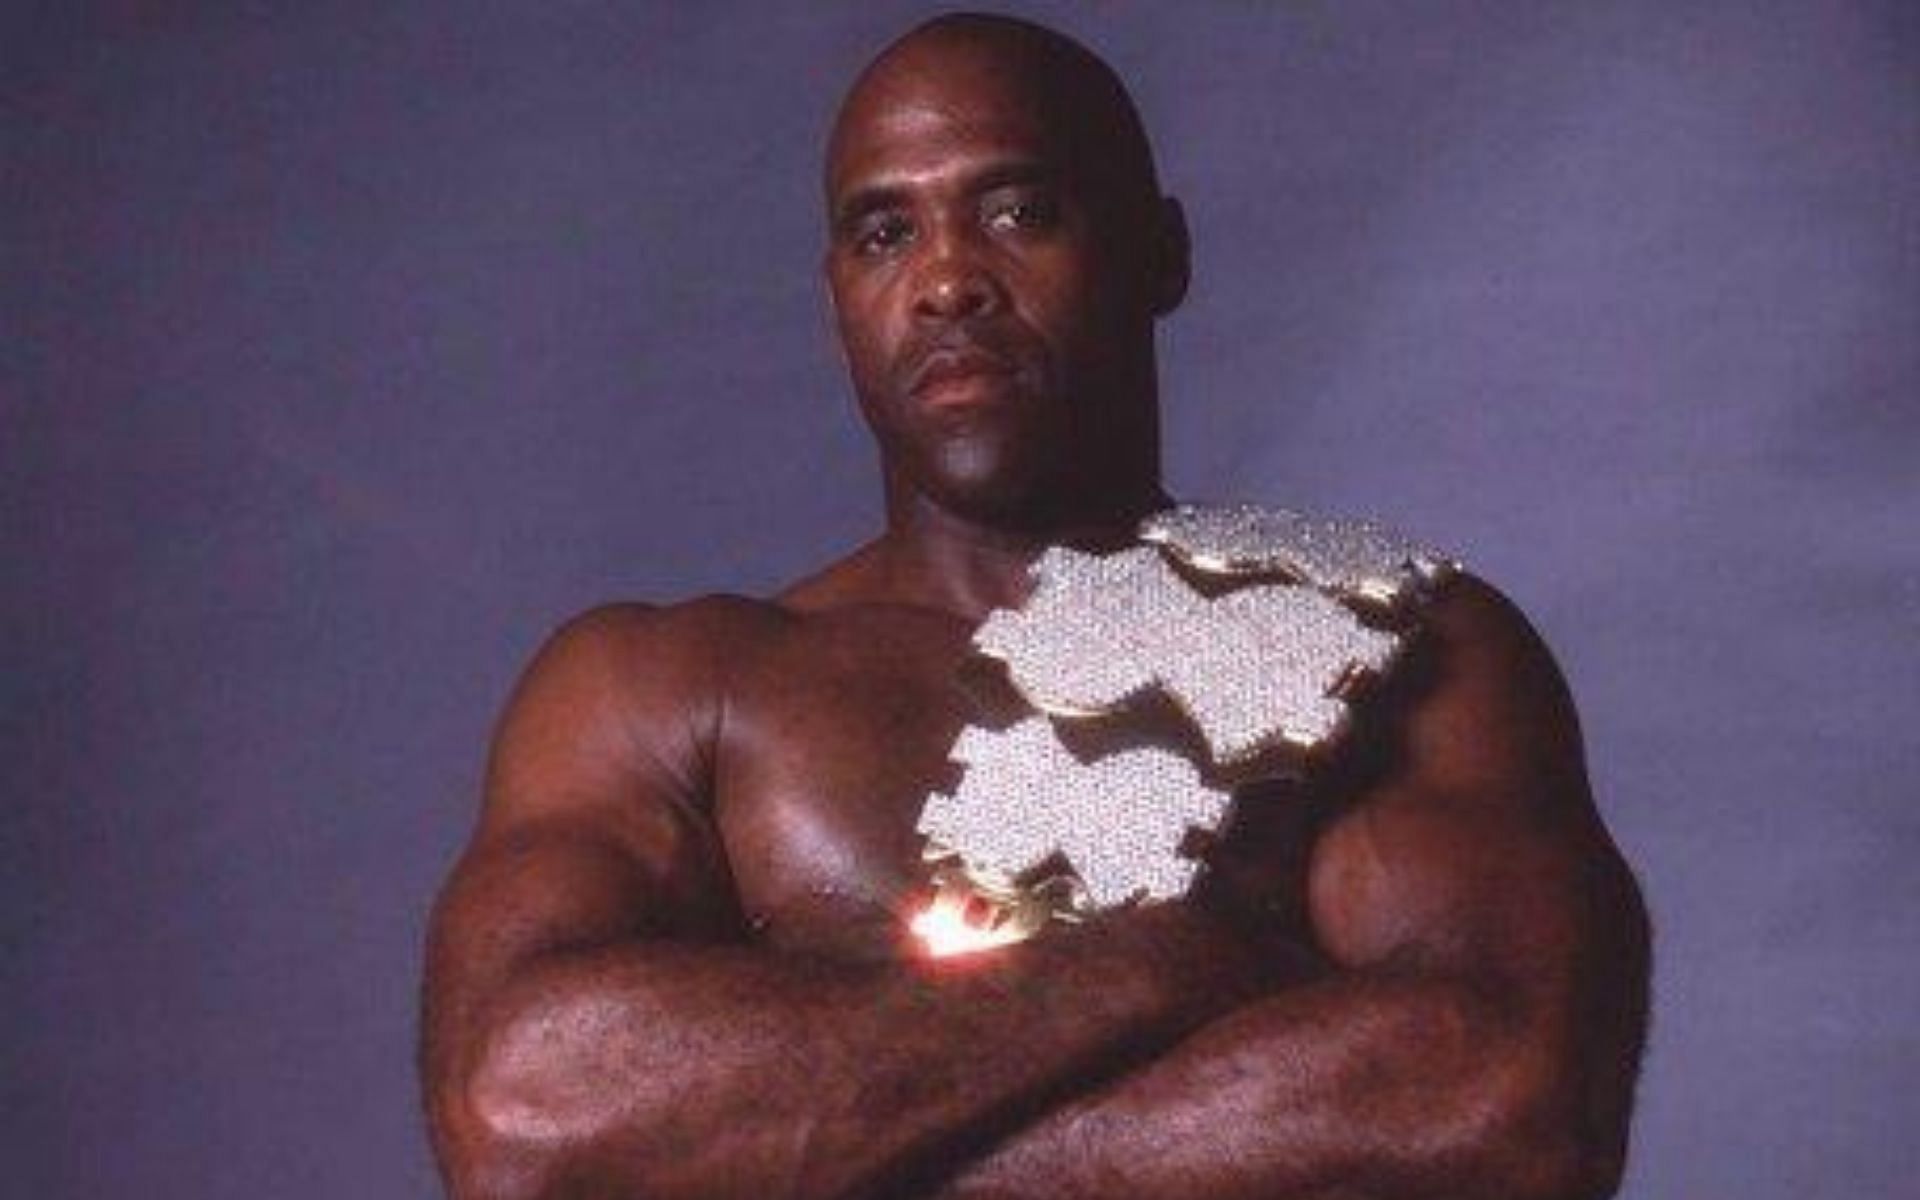 Virgil during his tenure as the Million Dollar Champion